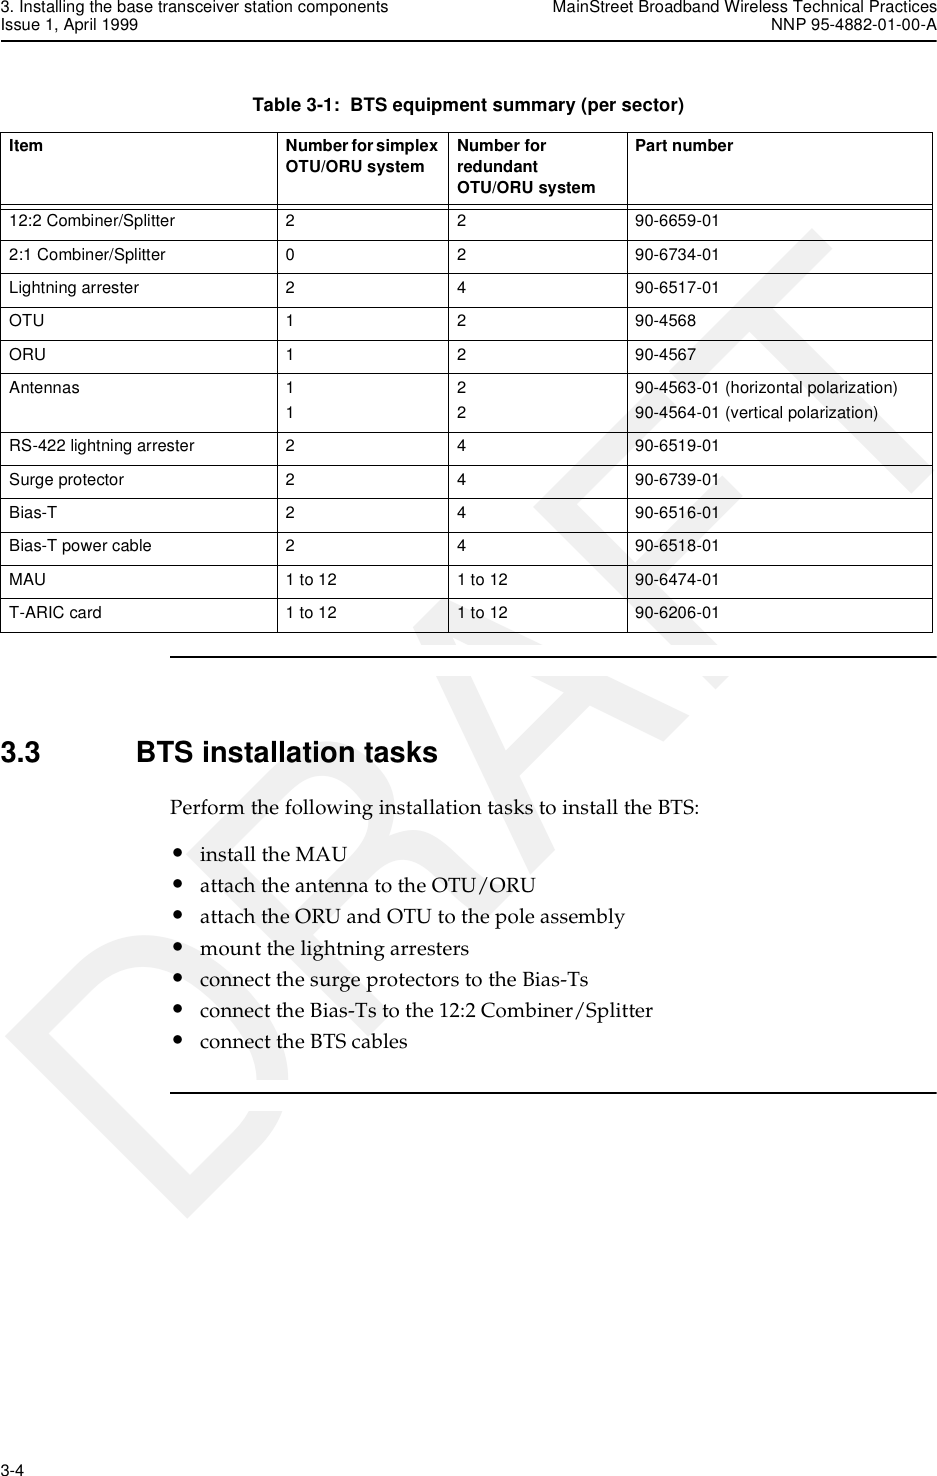 3. Installing the base transceiver station components MainStreet Broadband Wireless Technical PracticesIssue 1, April 1999 NNP 95-4882-01-00-A3-4   DRAFTTable 3-1:  BTS equipment summary (per sector)3.3 BTS installation tasksPerform the following installation tasks to install the BTS:•install the MAU•attach the antenna to the OTU/ORU•attach the ORU and OTU to the pole assembly•mount the lightning arresters•connect the surge protectors to the Bias-Ts•connect the Bias-Ts to the 12:2 Combiner/Splitter•connect the BTS cablesItem Number for simplex OTU/ORU system Number for redundant OTU/ORU systemPart number12:2 Combiner/Splitter 2 2 90-6659-012:1 Combiner/Splitter 0 2 90-6734-01Lightning arrester 2 4 90-6517-01OTU 1 2 90-4568ORU 1 2 90-4567Antennas 112290-4563-01 (horizontal polarization)90-4564-01 (vertical polarization)RS-422 lightning arrester 2 4 90-6519-01Surge protector 2 4 90-6739-01Bias-T 2 4 90-6516-01Bias-T power cable 2 4 90-6518-01MAU 1 to 12 1 to 12 90-6474-01T-ARIC card 1 to 12 1 to 12 90-6206-01